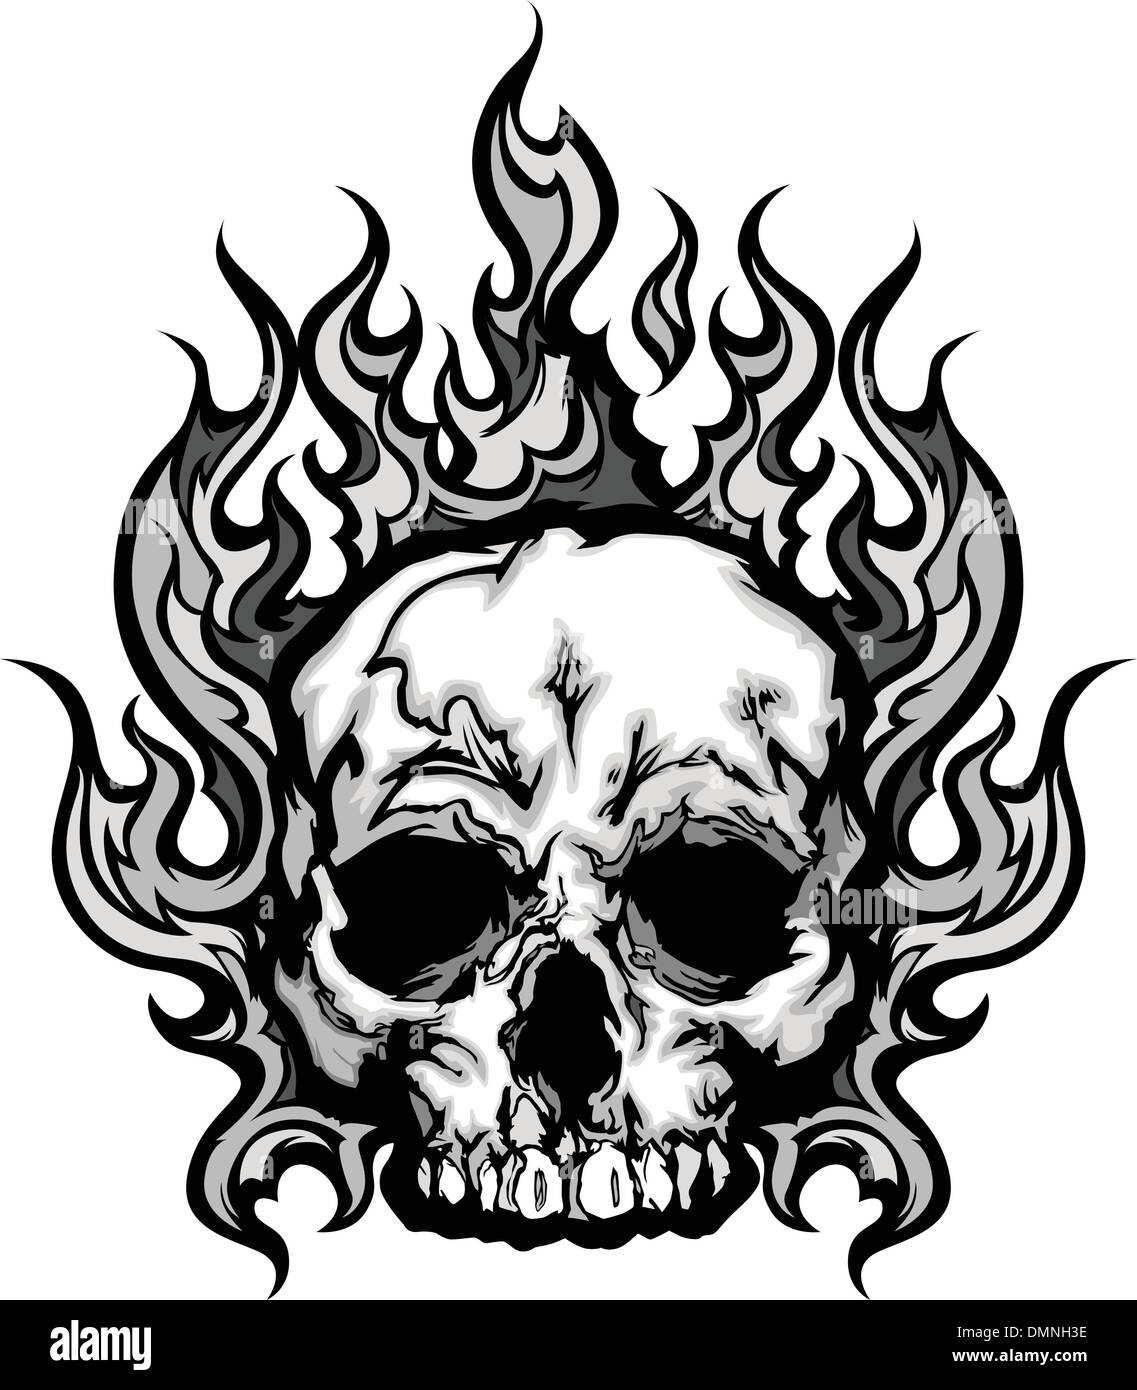 Human Skull With Gun And Flames For Tattoo Design Royalty Free SVG,  Cliparts, Vectors, and Stock Illustration. Image 16653960.